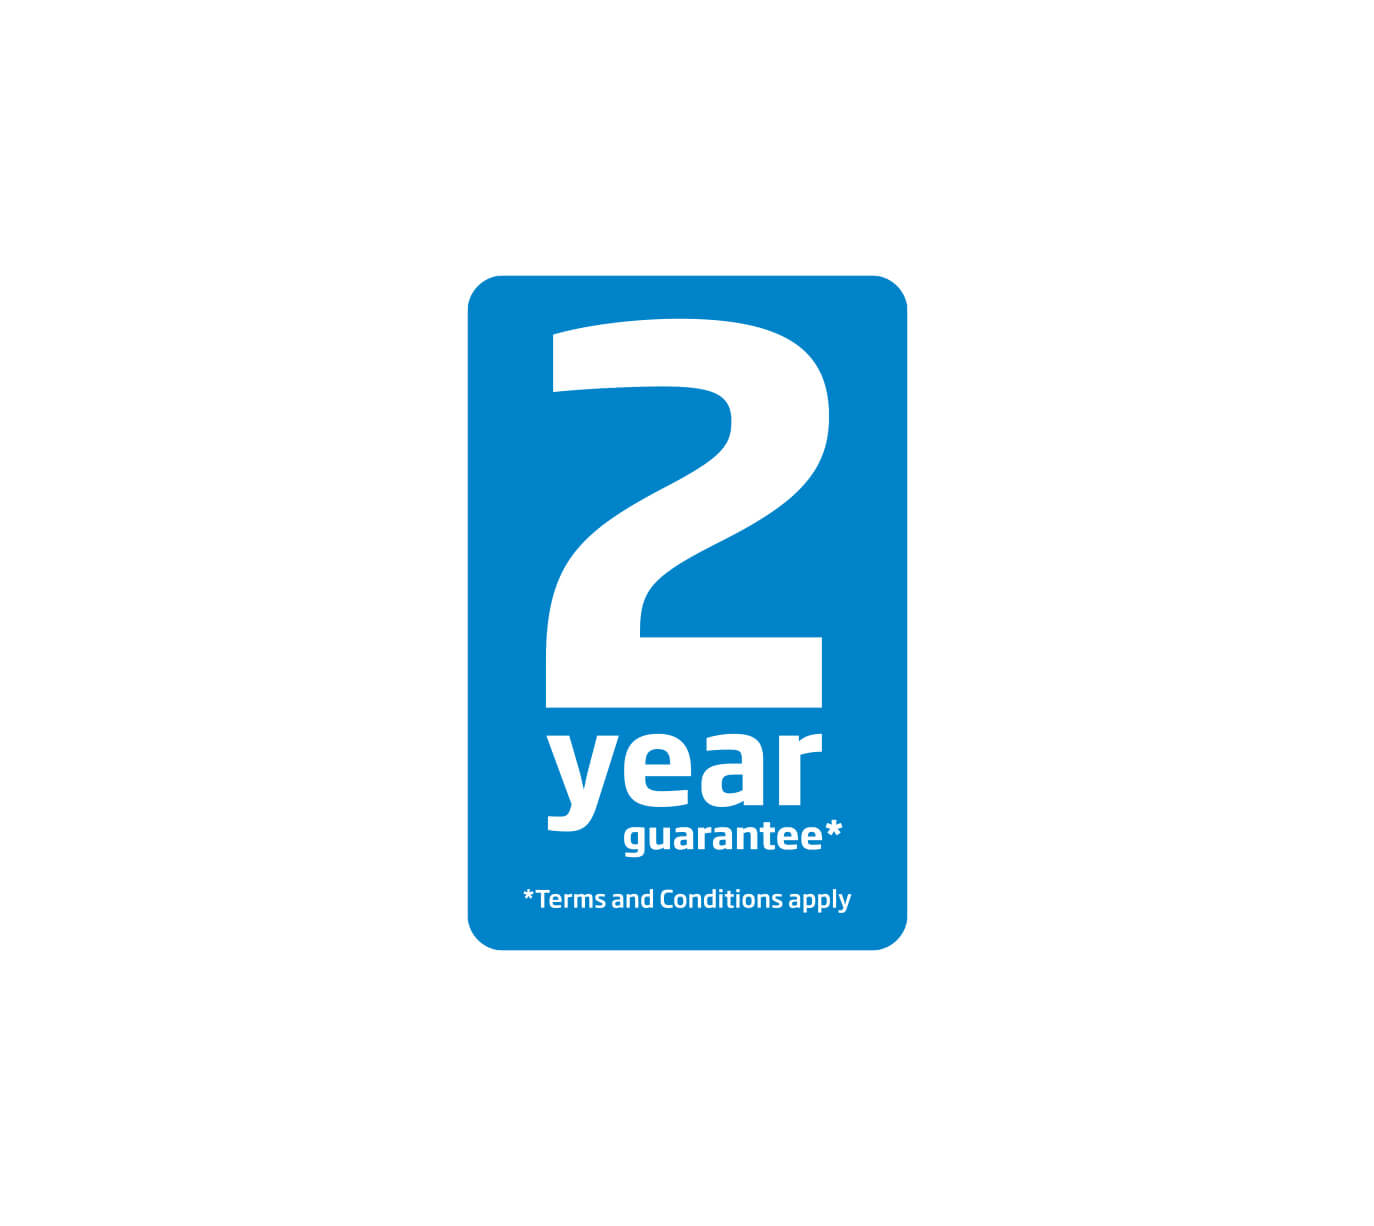 2 year guarantee on all Beko Built-in appliances